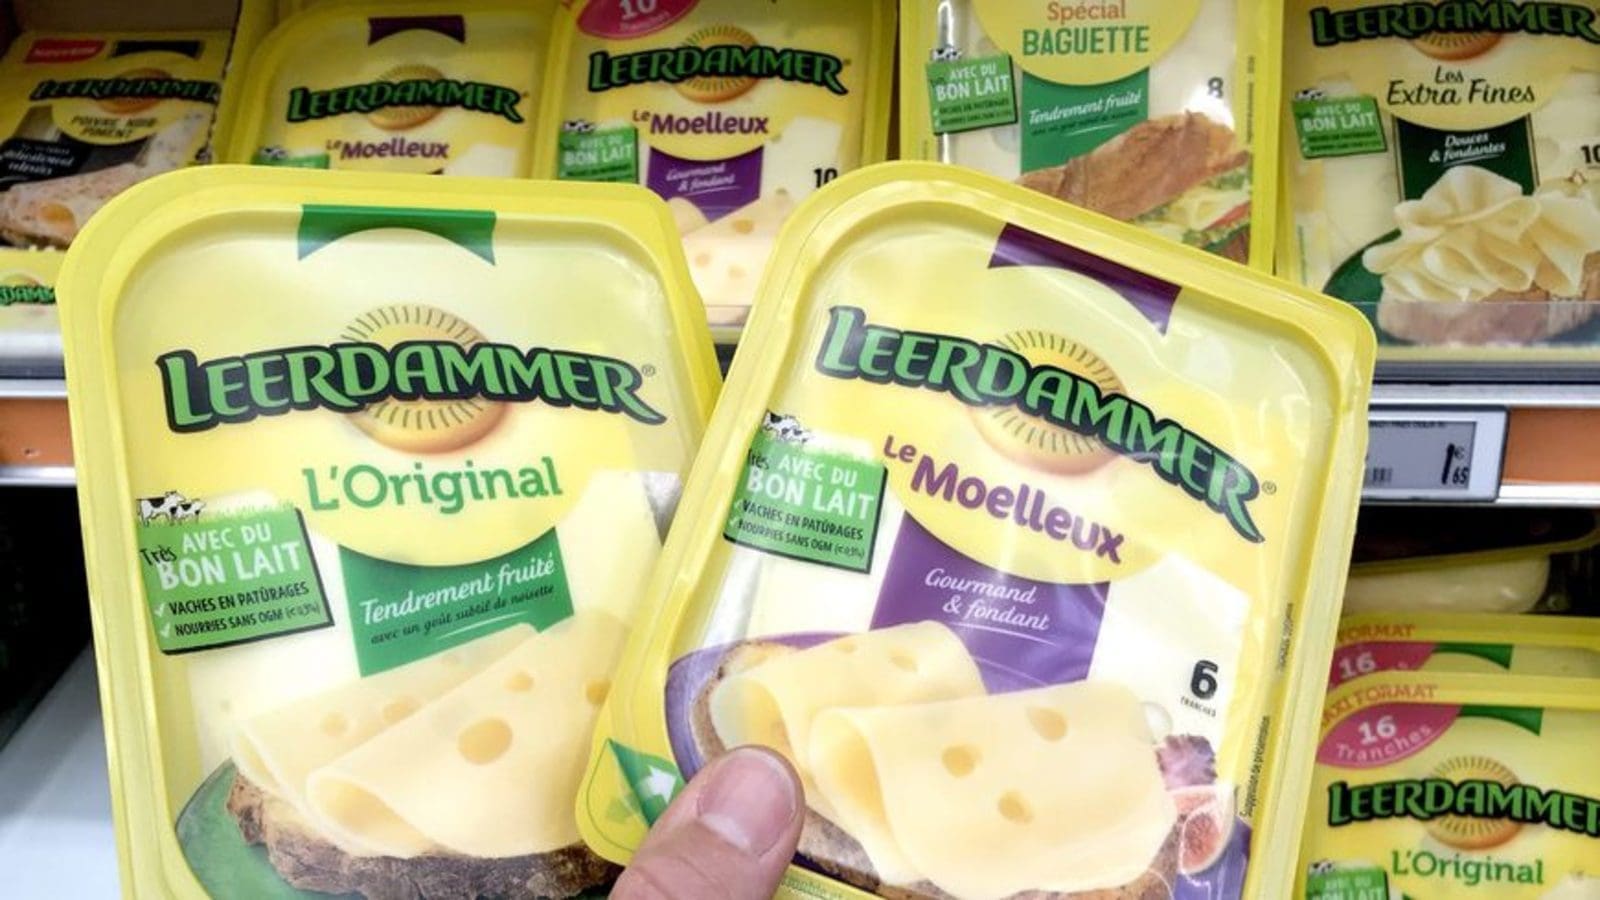 Lactalis expands dairy portfolio with acquisition of Leerdammer and Shostka brands